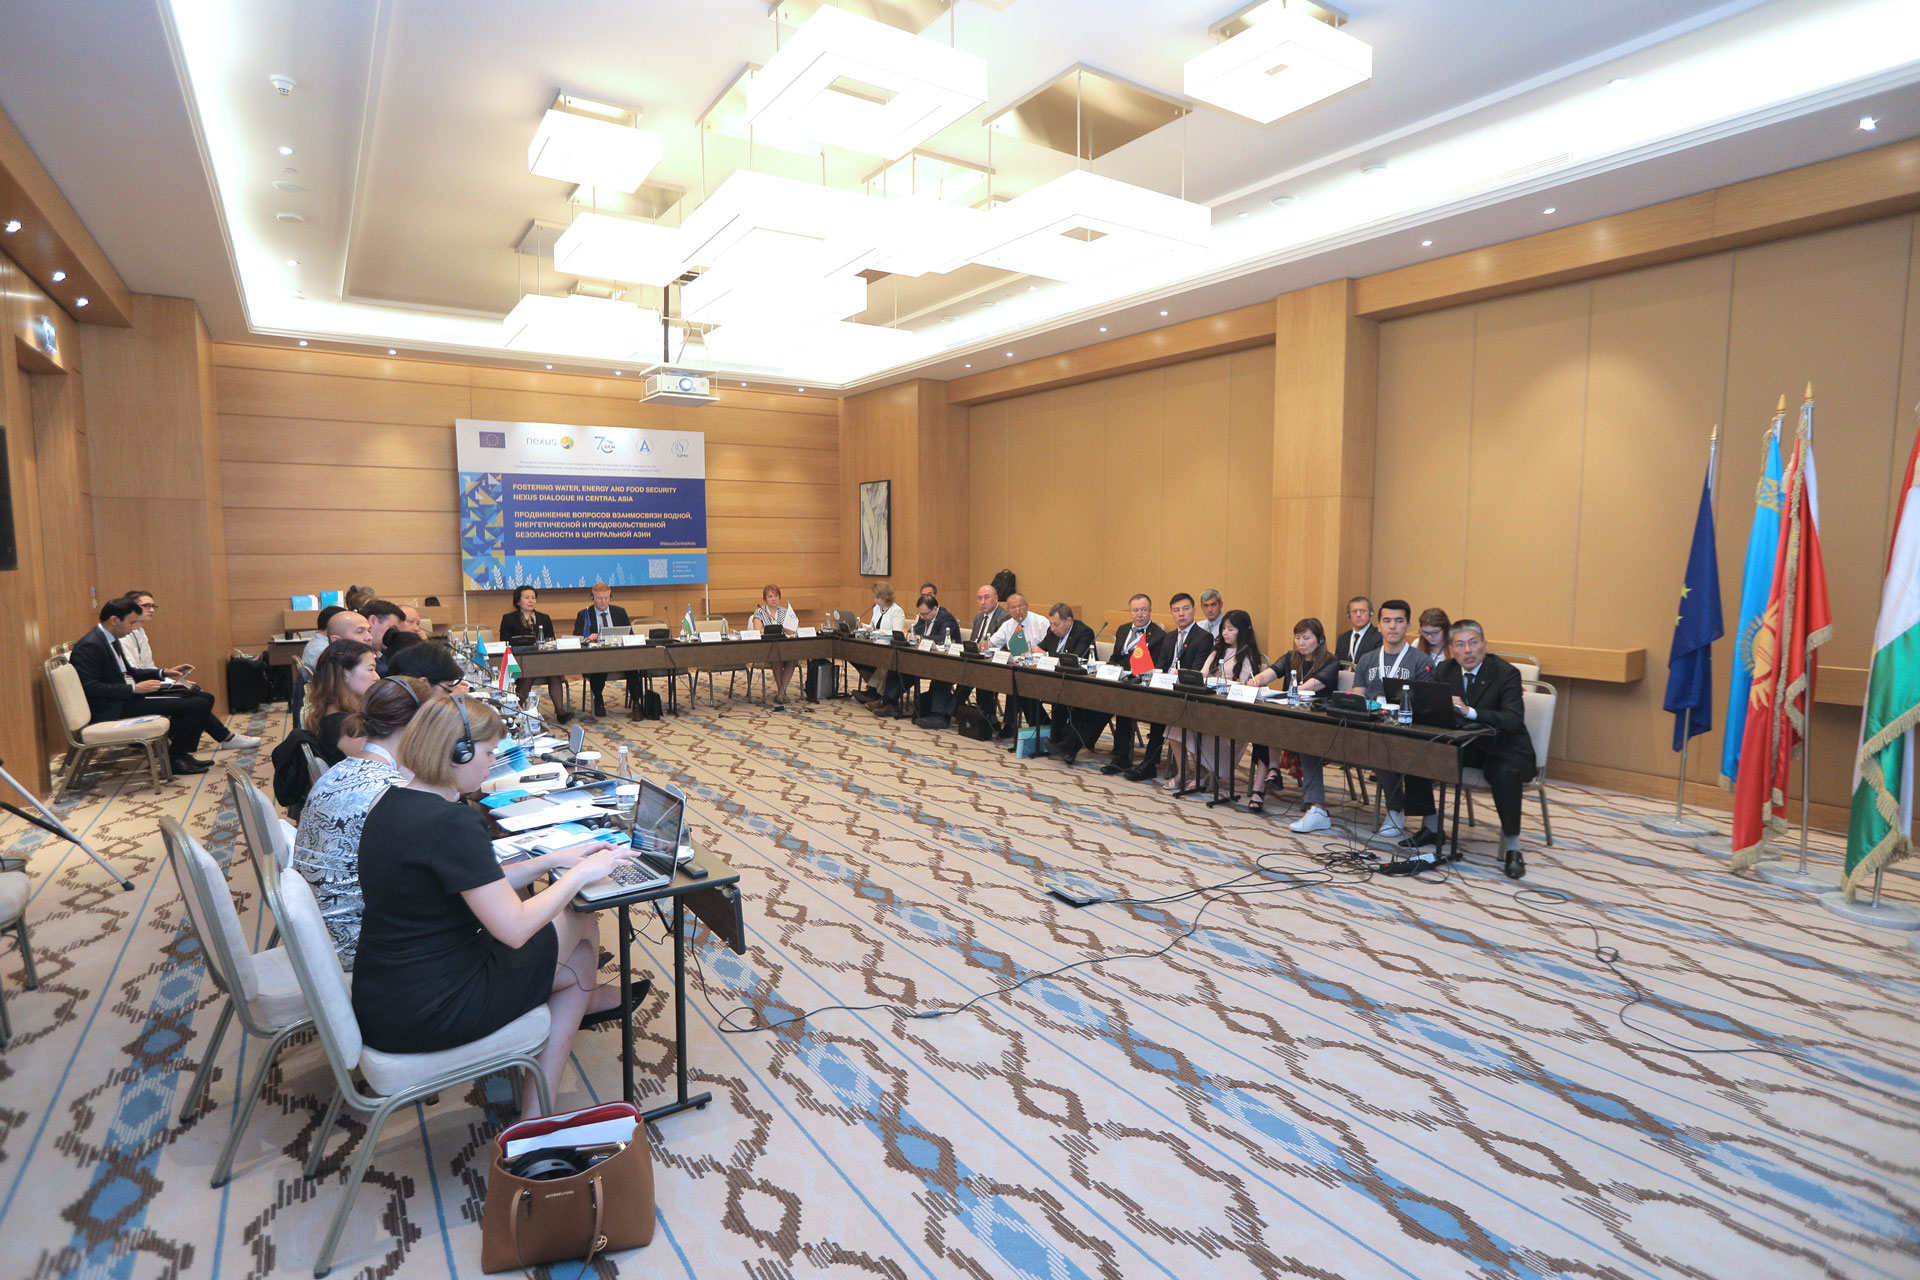 Investments to strengthen water, energy and food security in Central Asia were discussed at CAIEF 2018